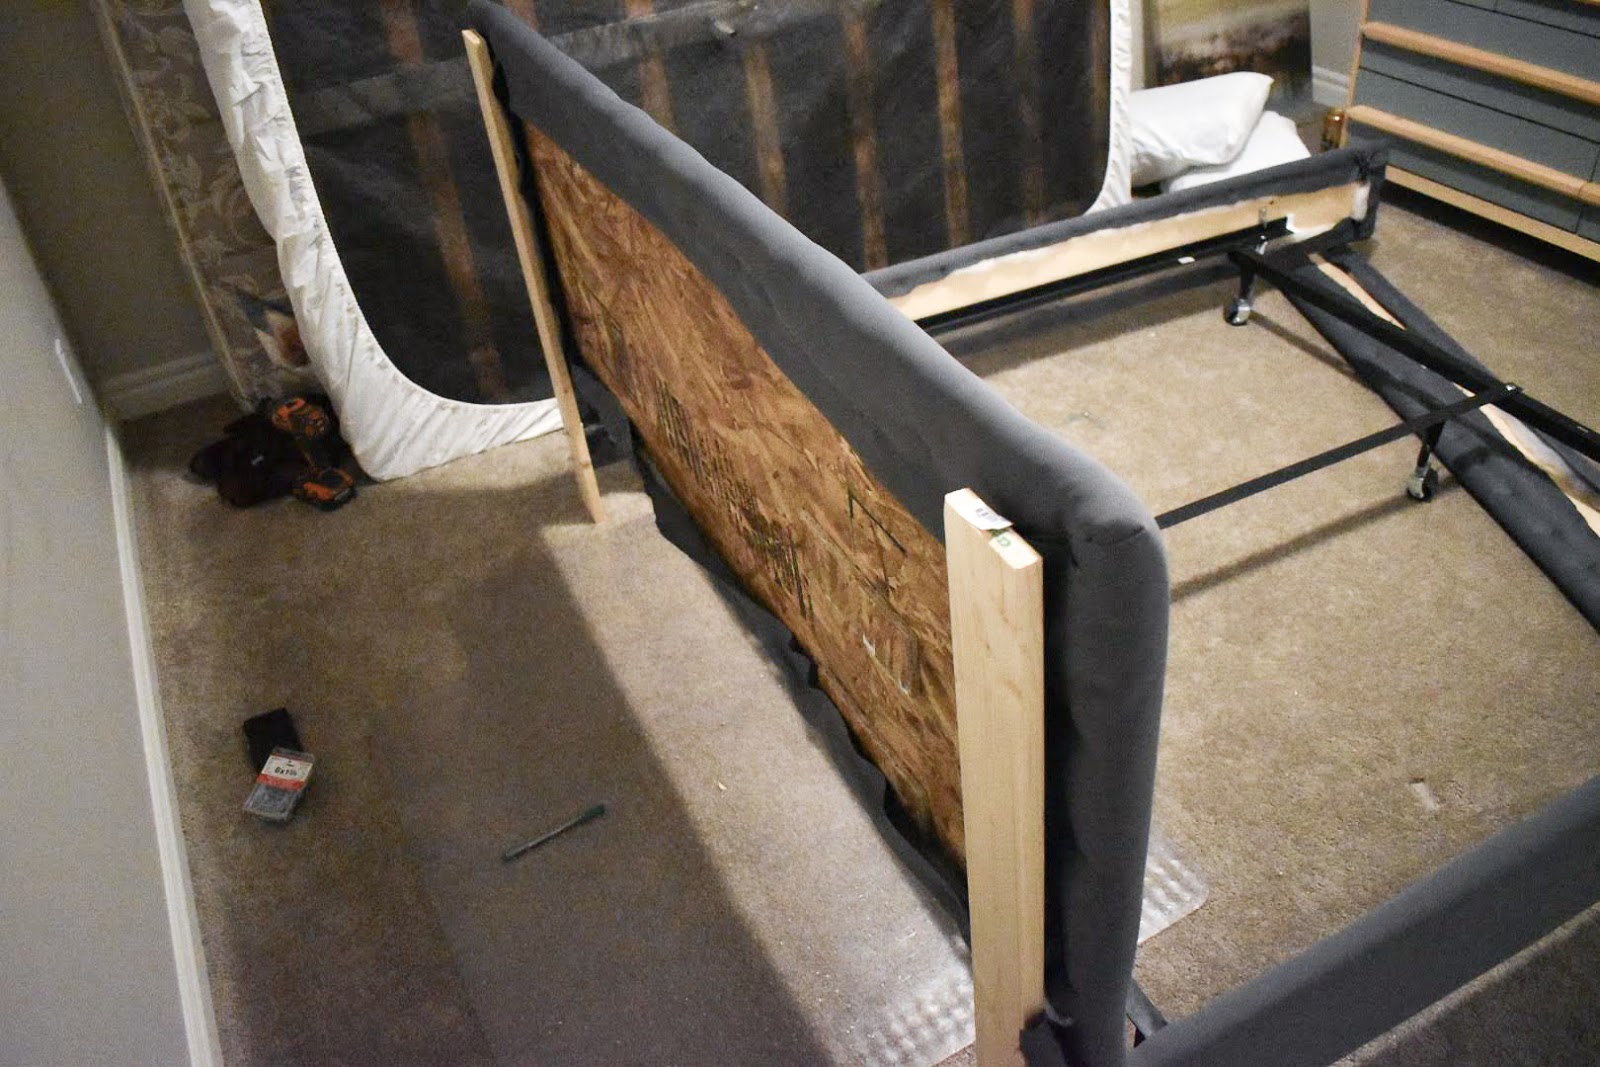 Metal Bed Frame Into An Upholstered, How To Attach Frame Headboard